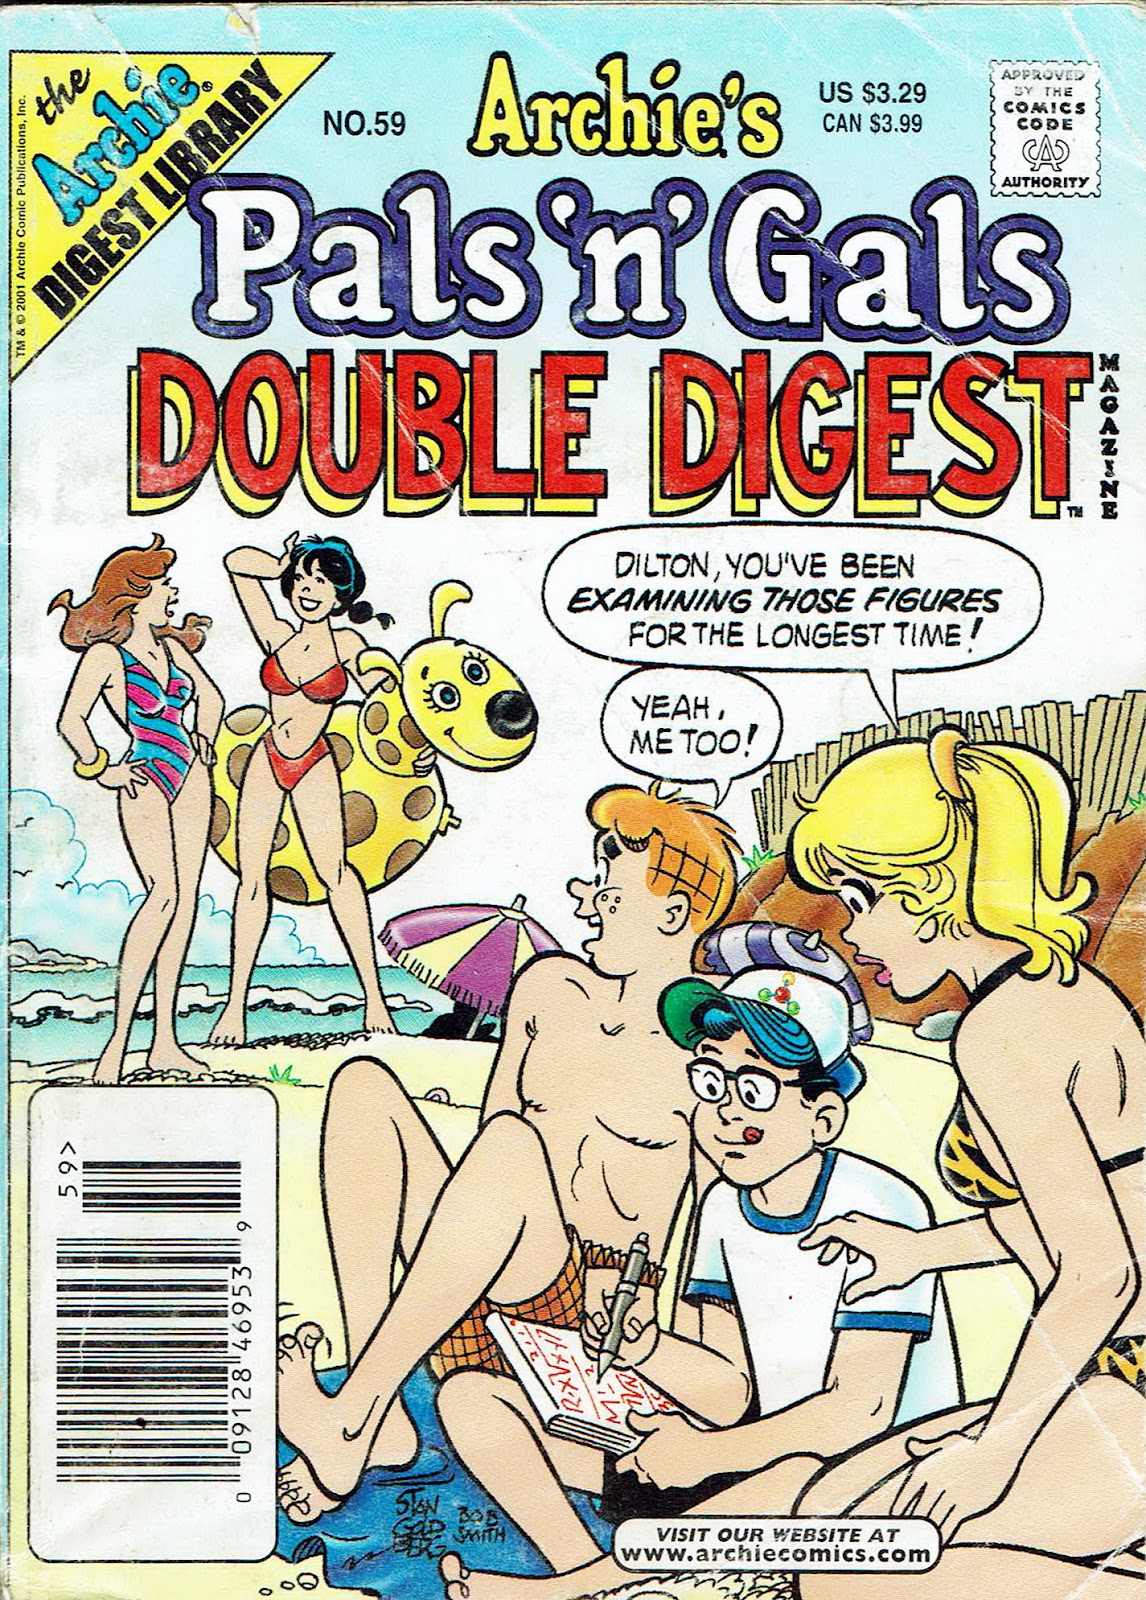 Archie's Pals 'n' Gals Double Digest Magazine issue 59 - Page 1